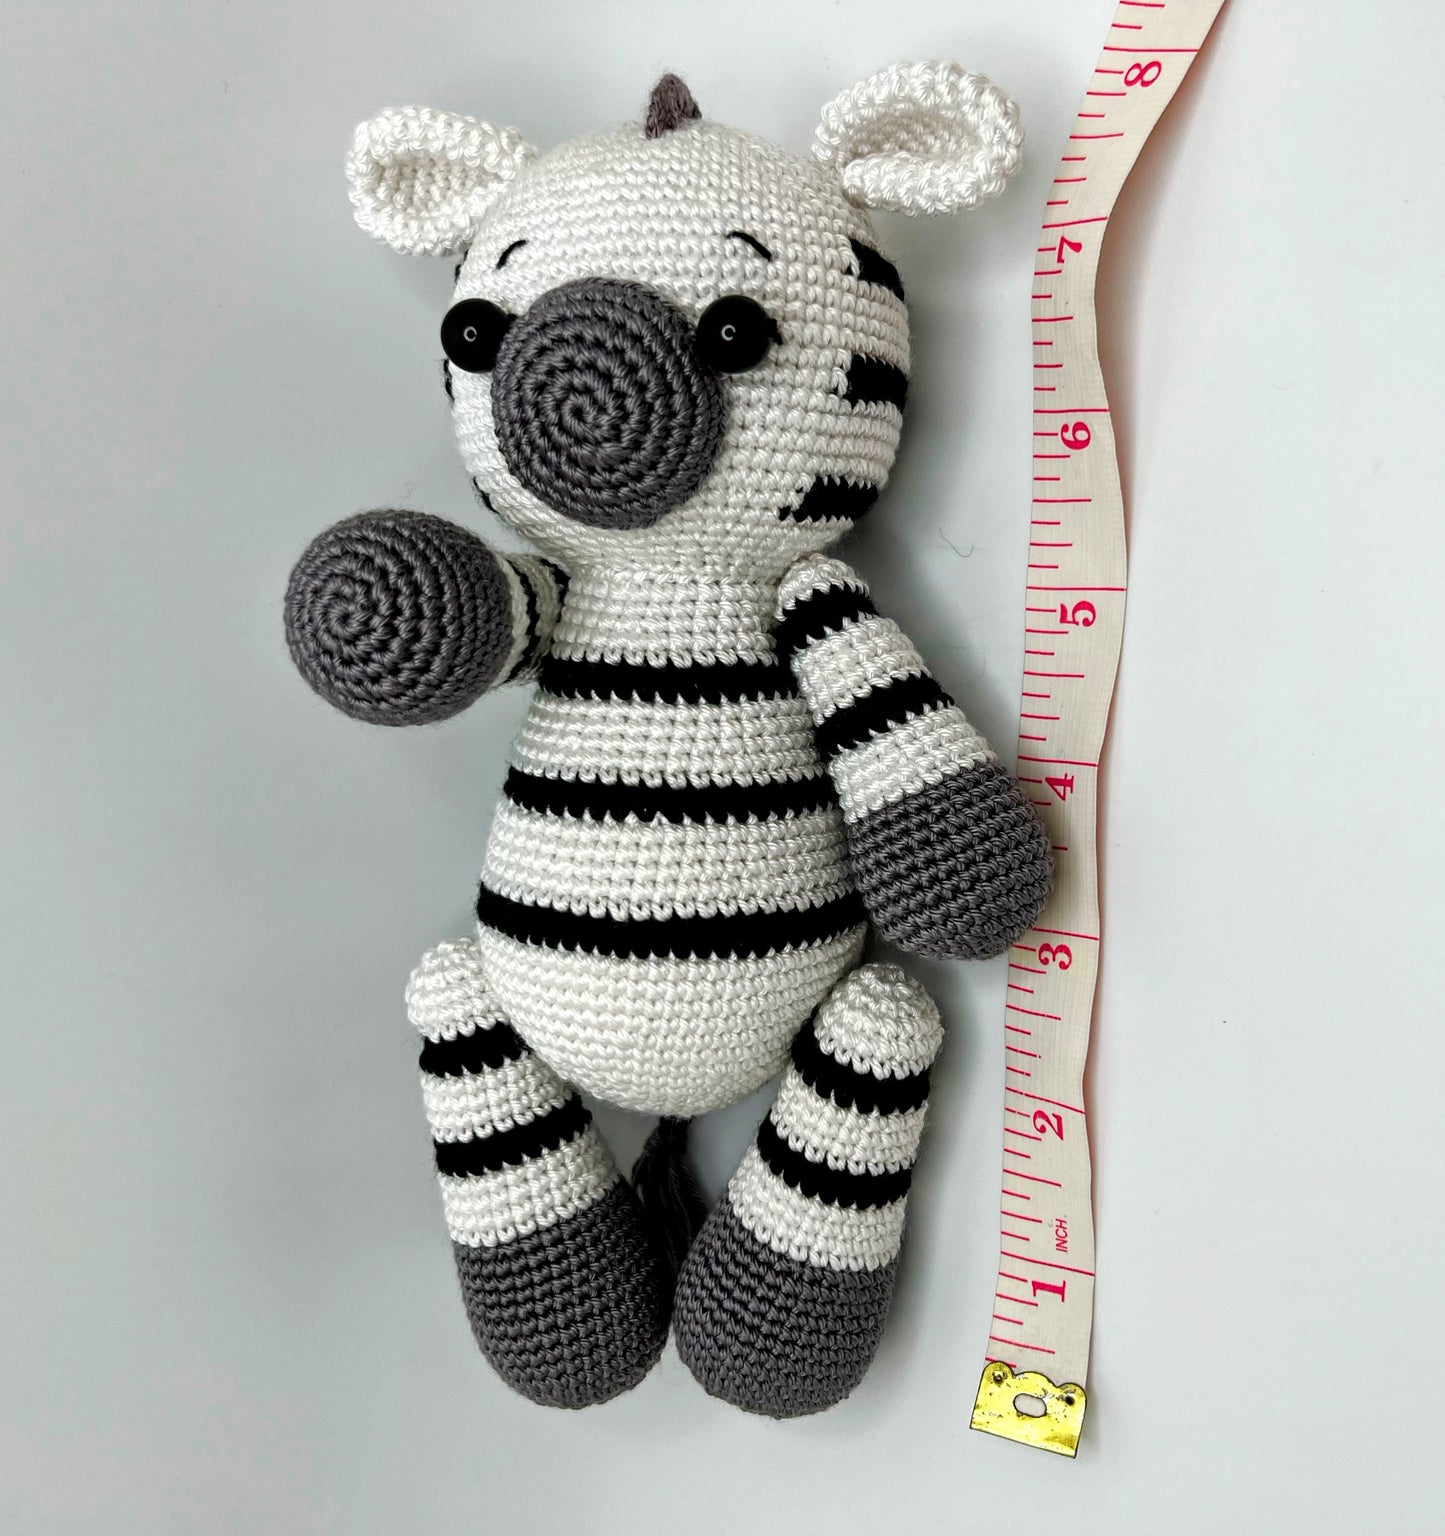 Stuffed Zebra Toy With Moving Legs - Crochet Knitted Amigurumi Toy